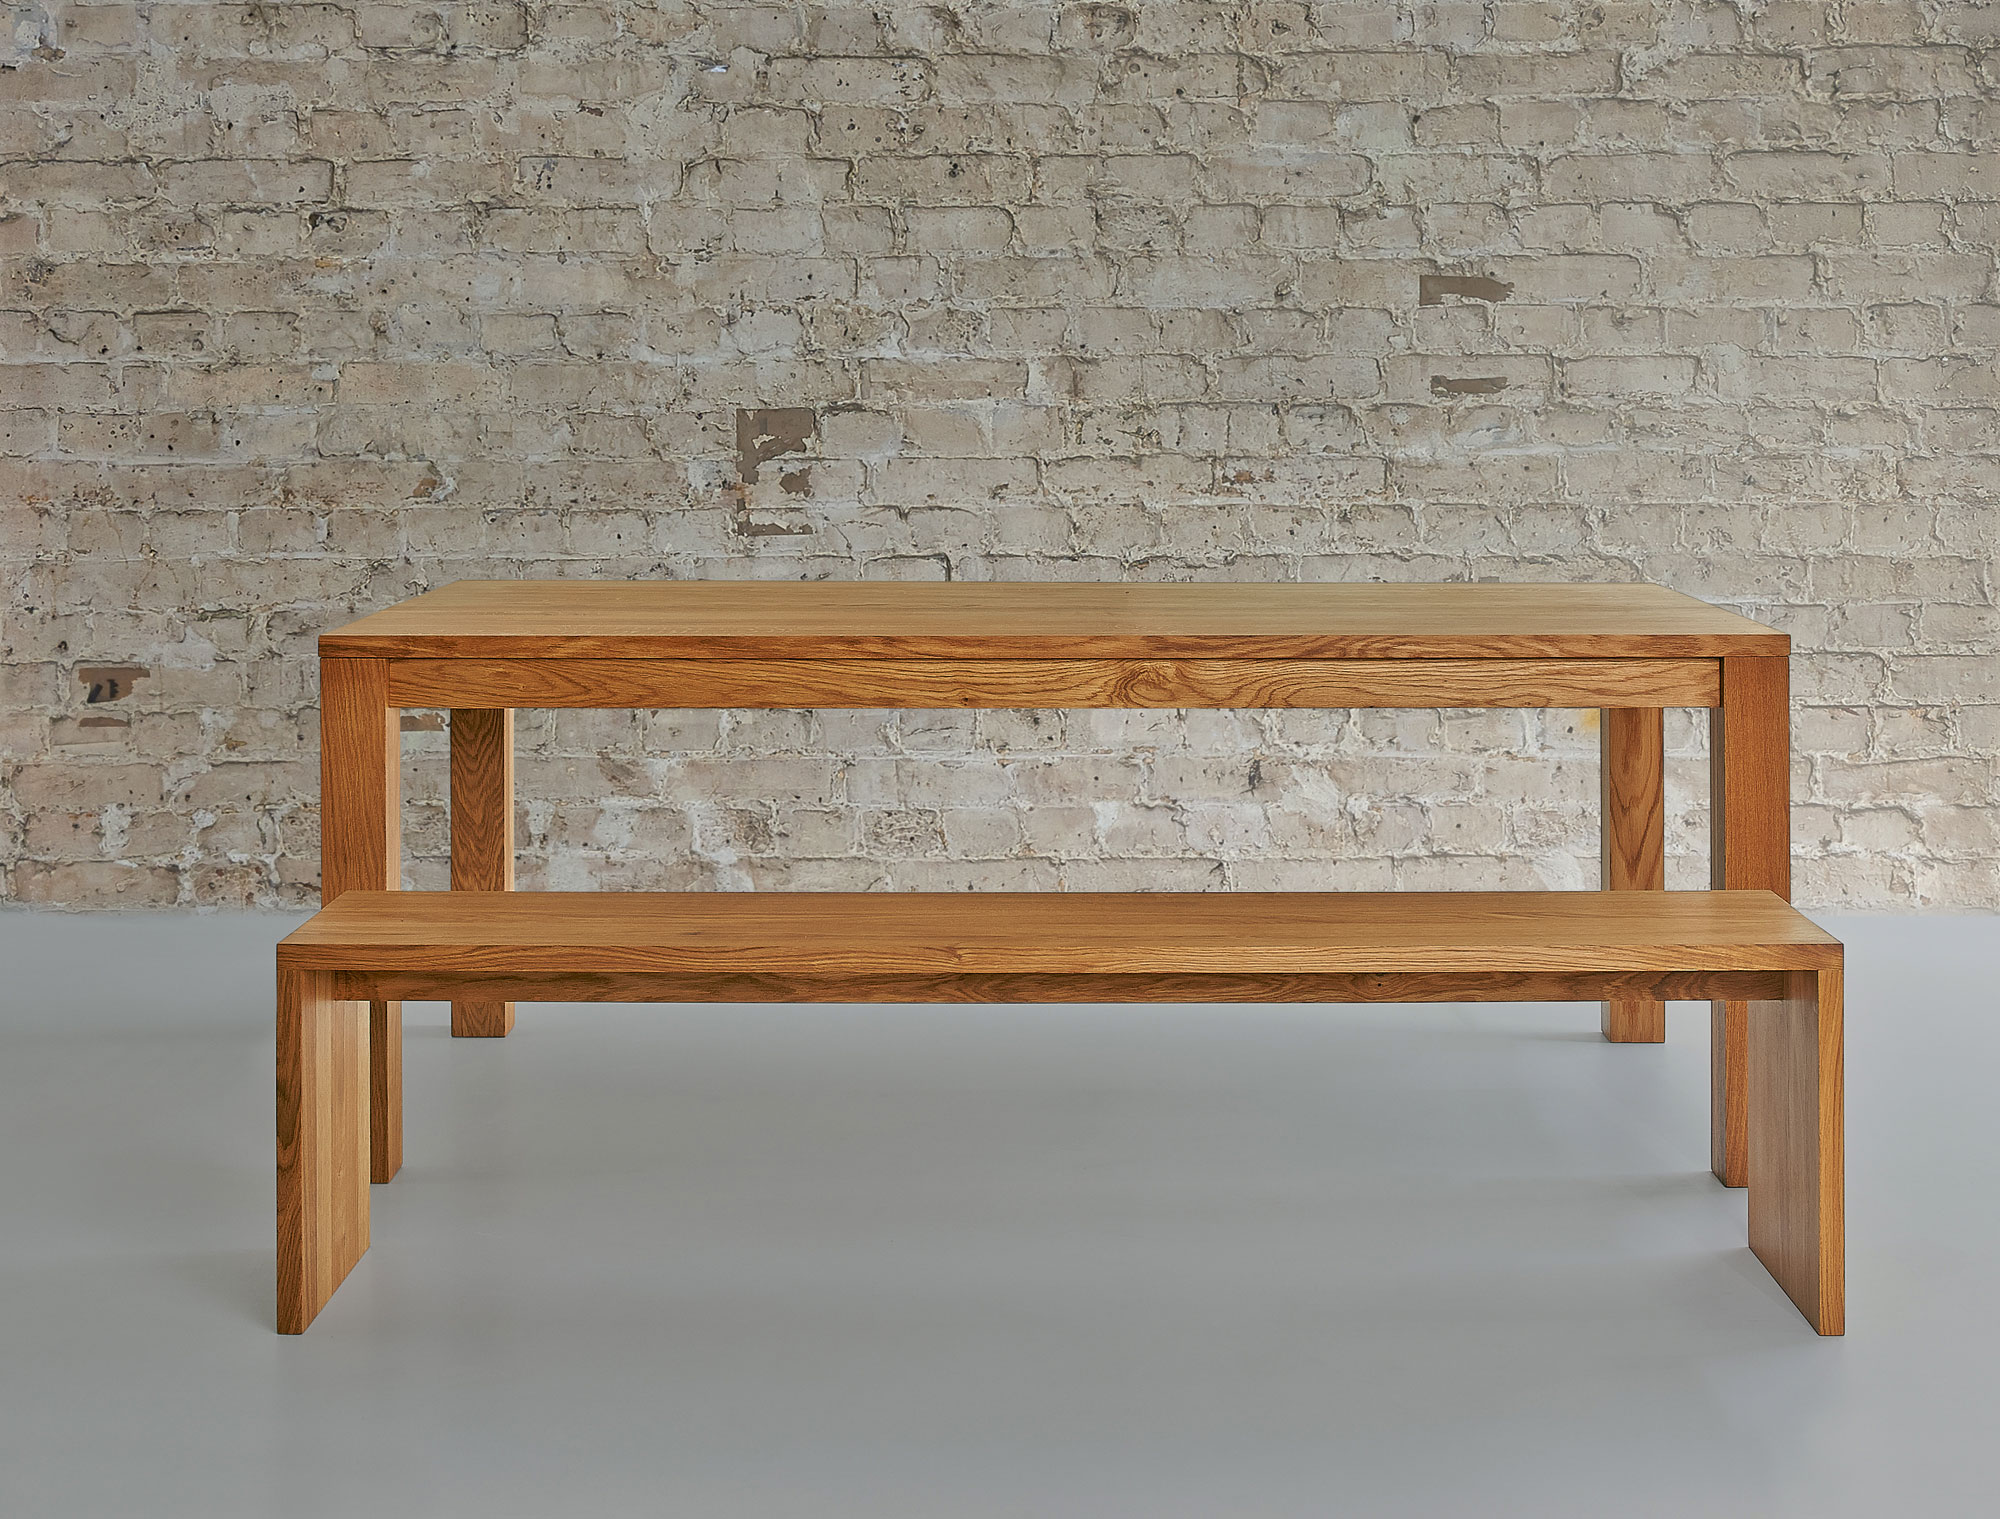 Solid Wood Bench MENA 3 1019 custom made in solid wood by vitamin design